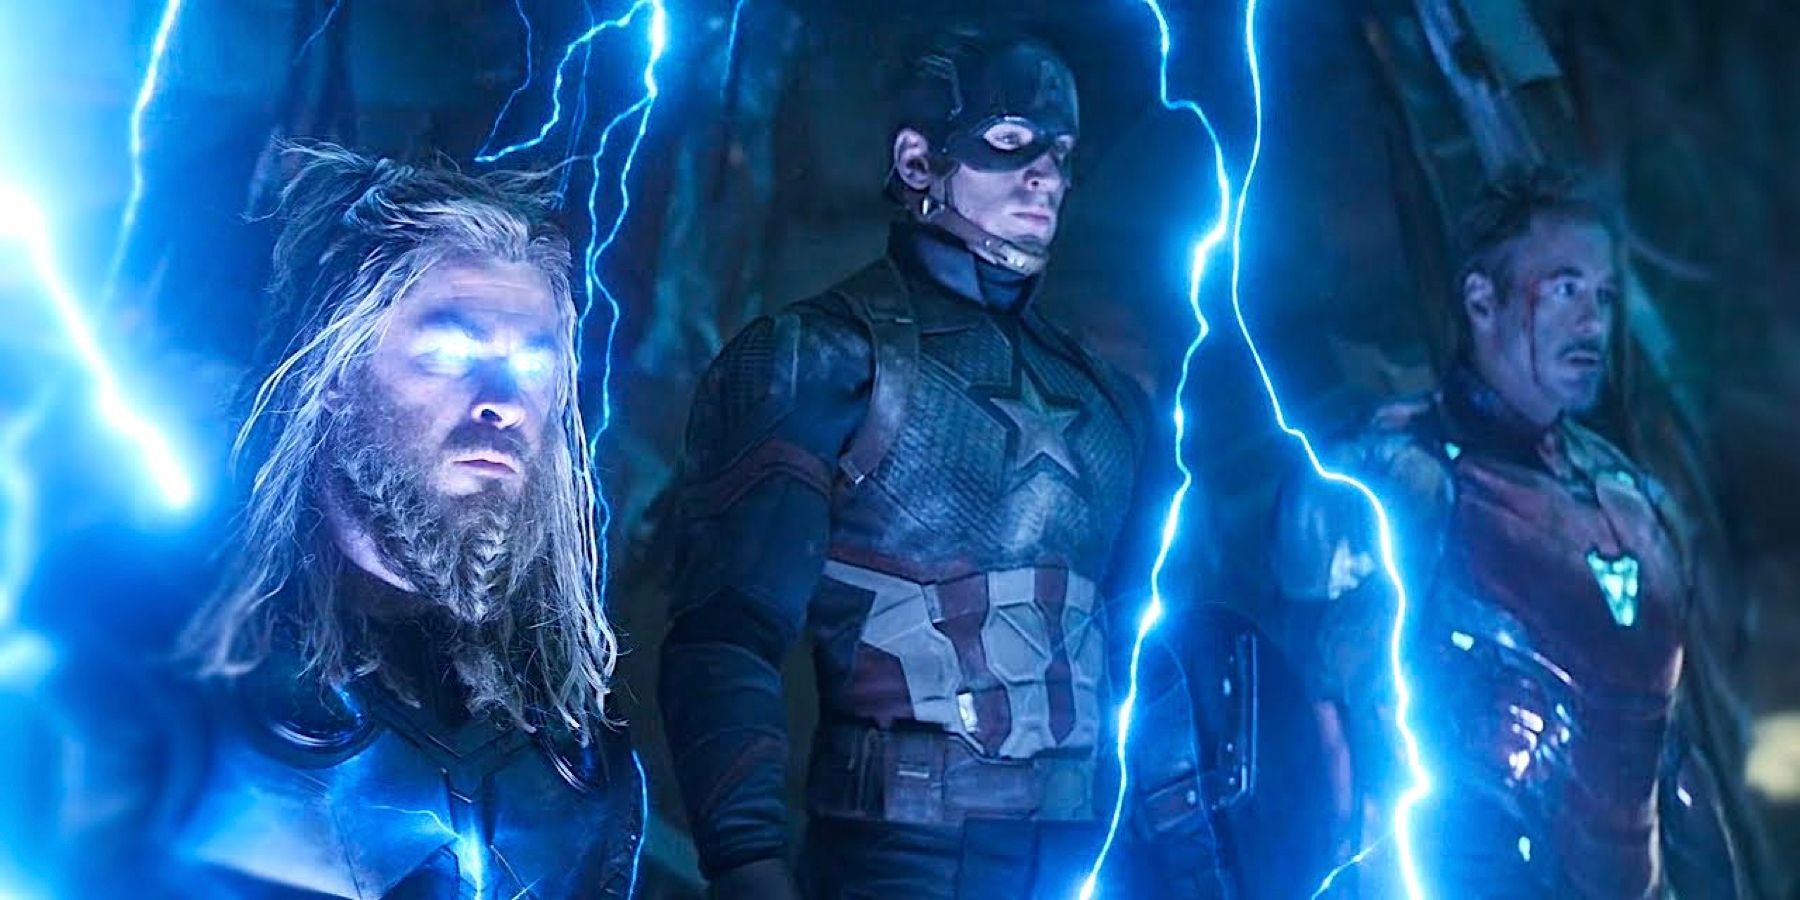 Thor, Captain America, and Iron Man look solemn as lightning crackles around them in Avengers: Endgame.